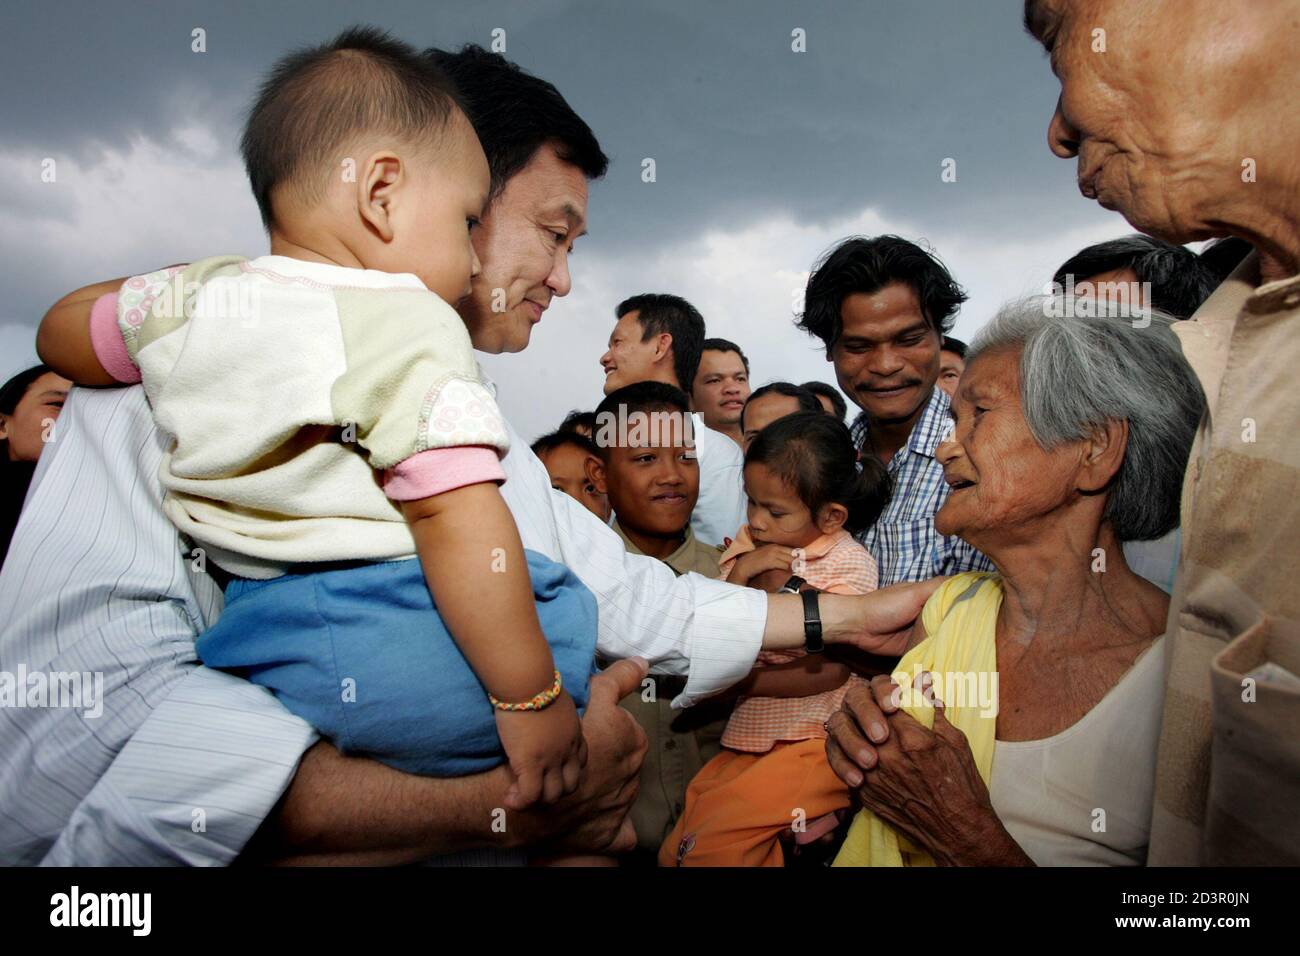 Thai Prime Minister Thaksin Shinawatra carries a child as he meets villagers in Yala province, 1,200 km (750 miles) south of Bangkok, on February 16, 2005. Thaksin arrived in the largely Muslim south on Wednesday with a stern message for villagers tempted to help separatist militants. REUTERS/Sukree Sukplang  SS/SA Stock Photo